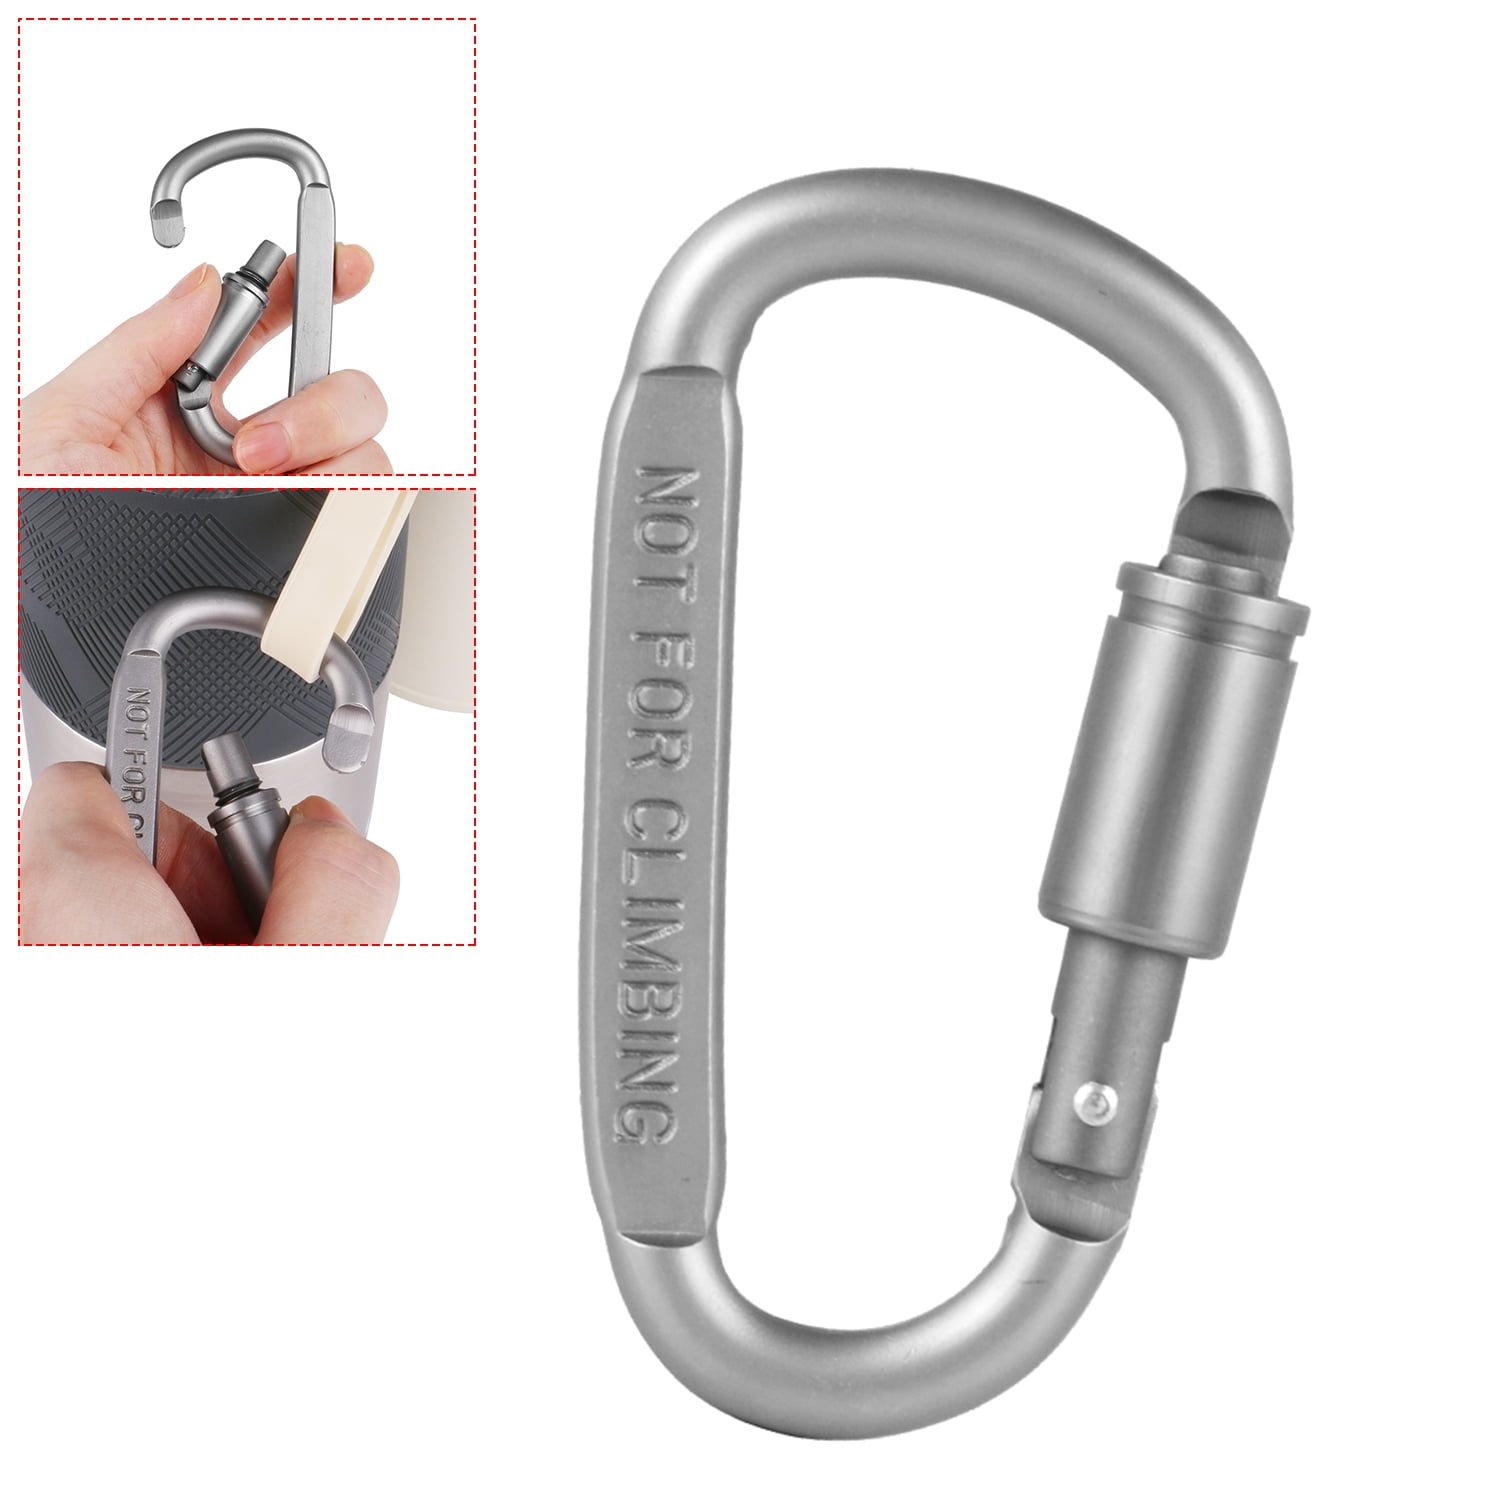 10x Carabiner Clip Key Ring Holder Chain Cable Hiking Hook Lock Camping D Shape 